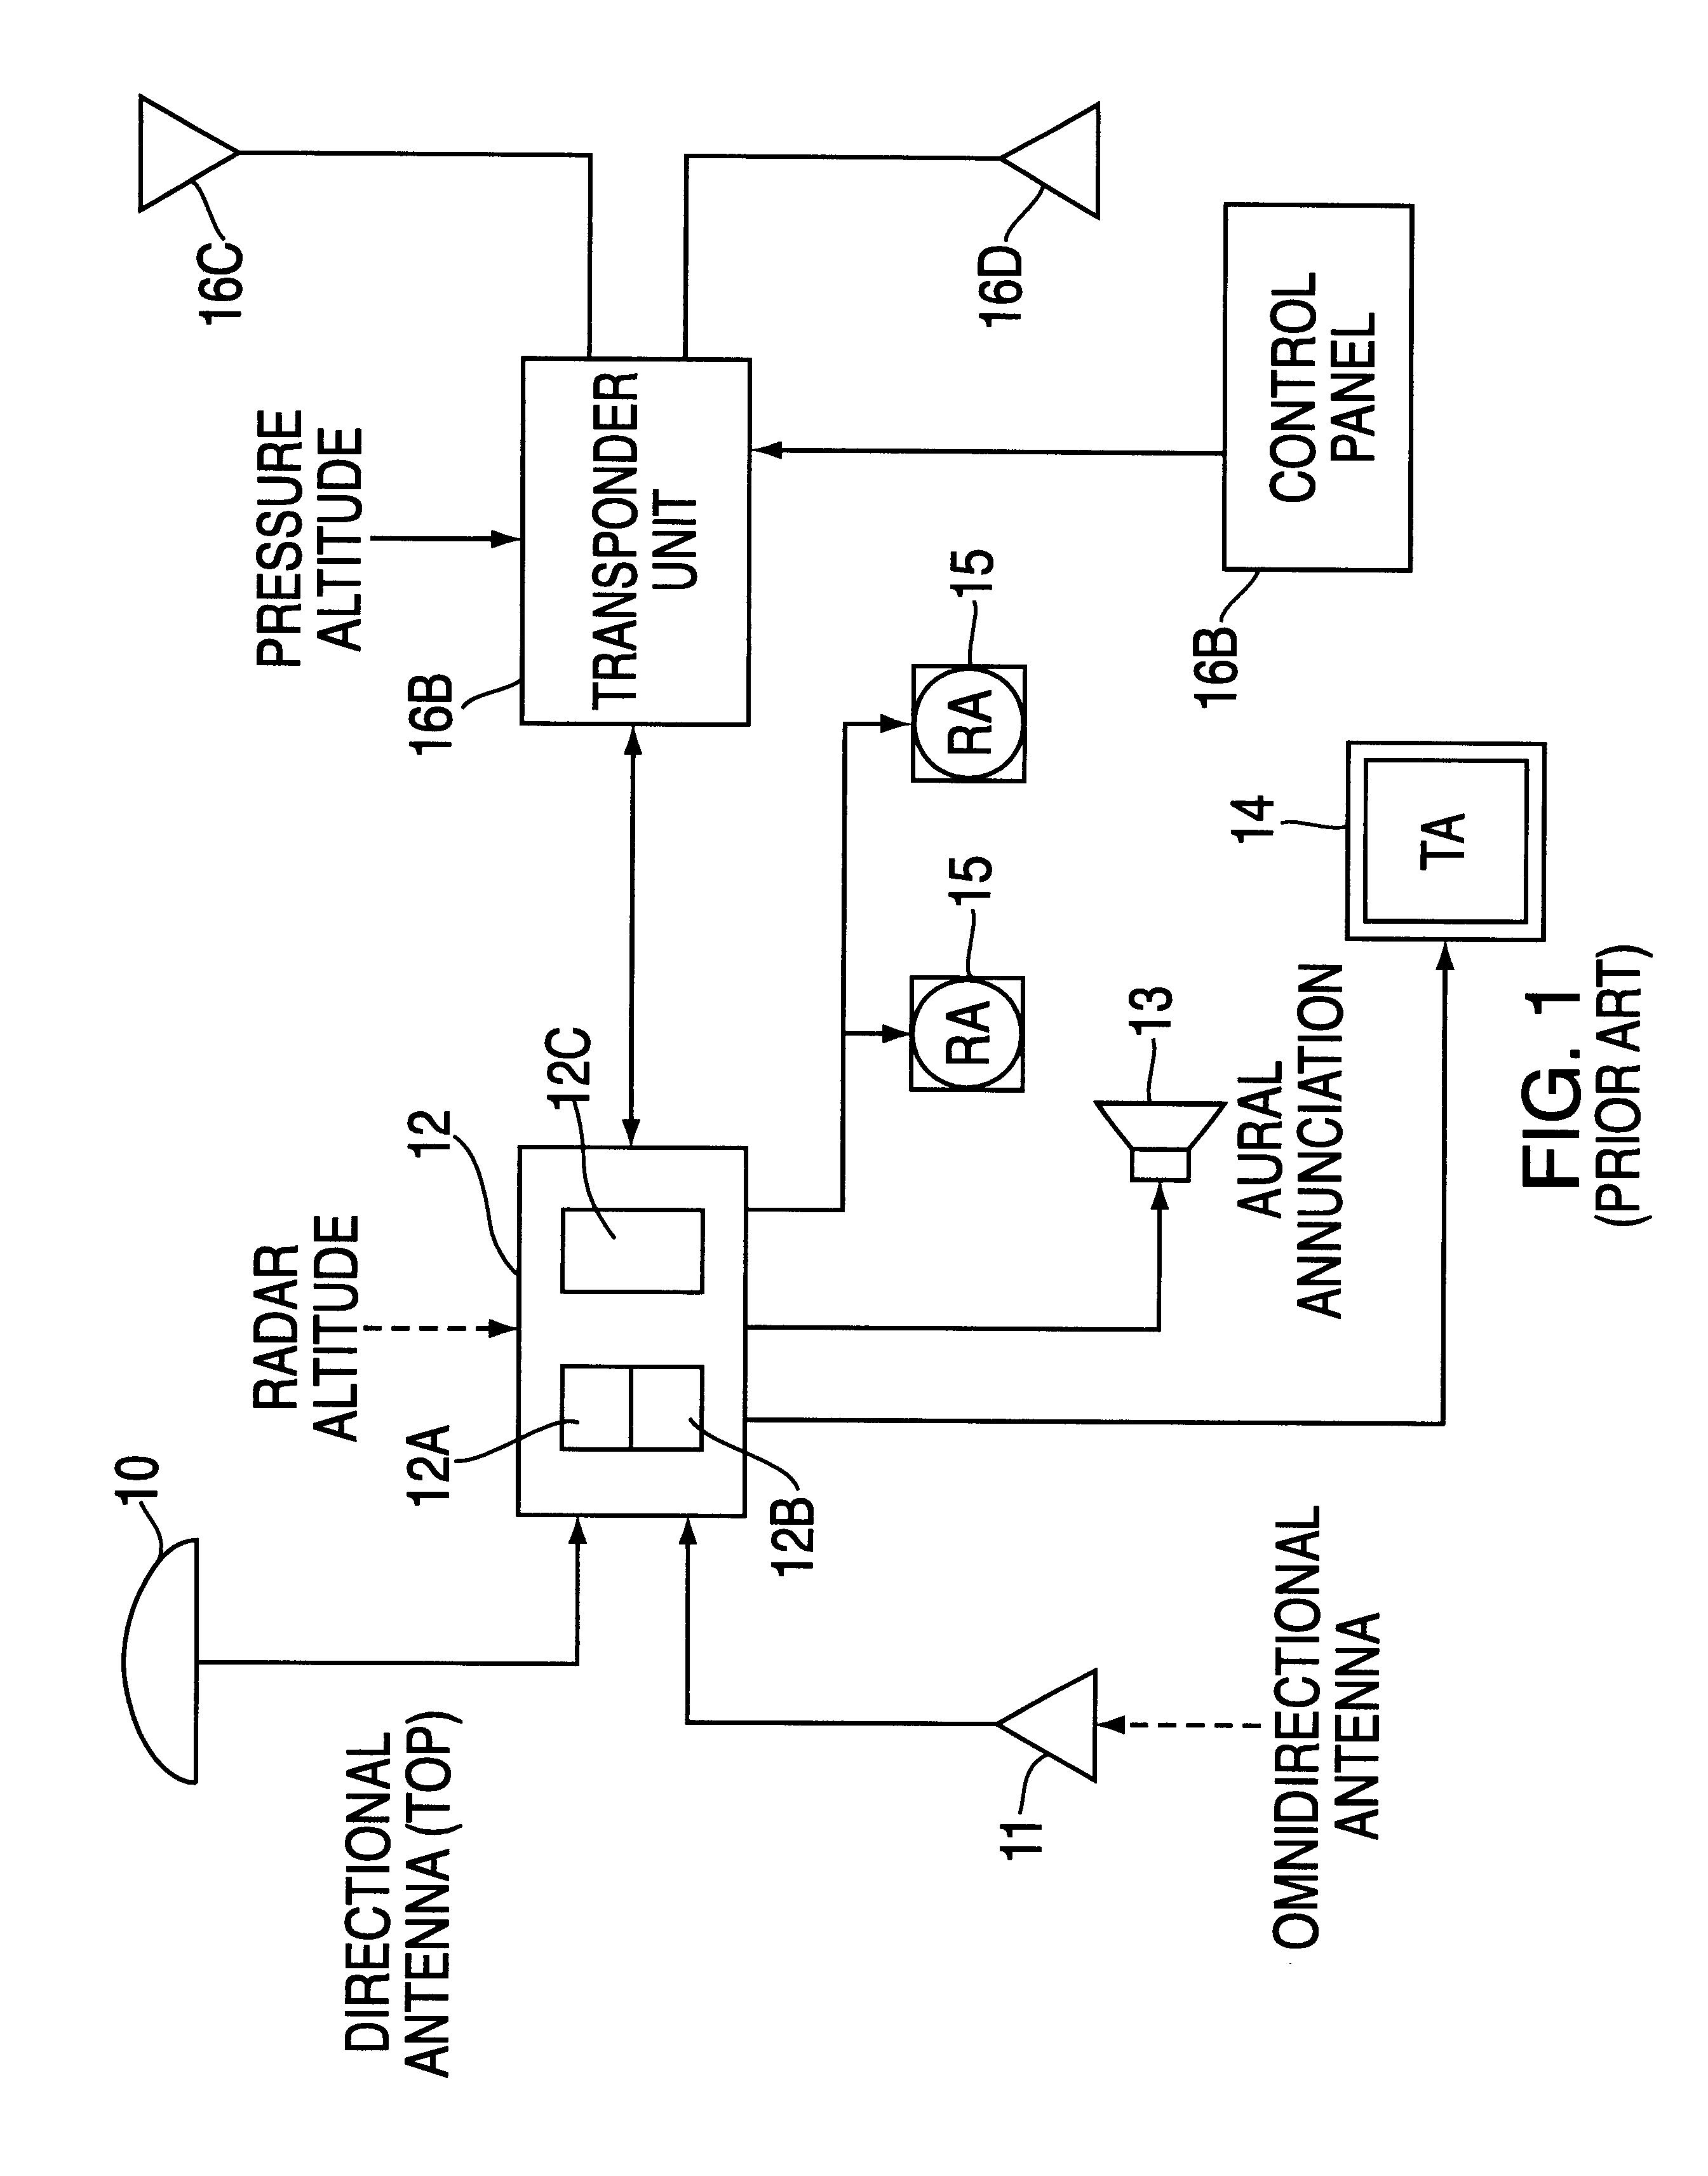 Vertical speed indicator/traffic resolution advisory display for TCAS